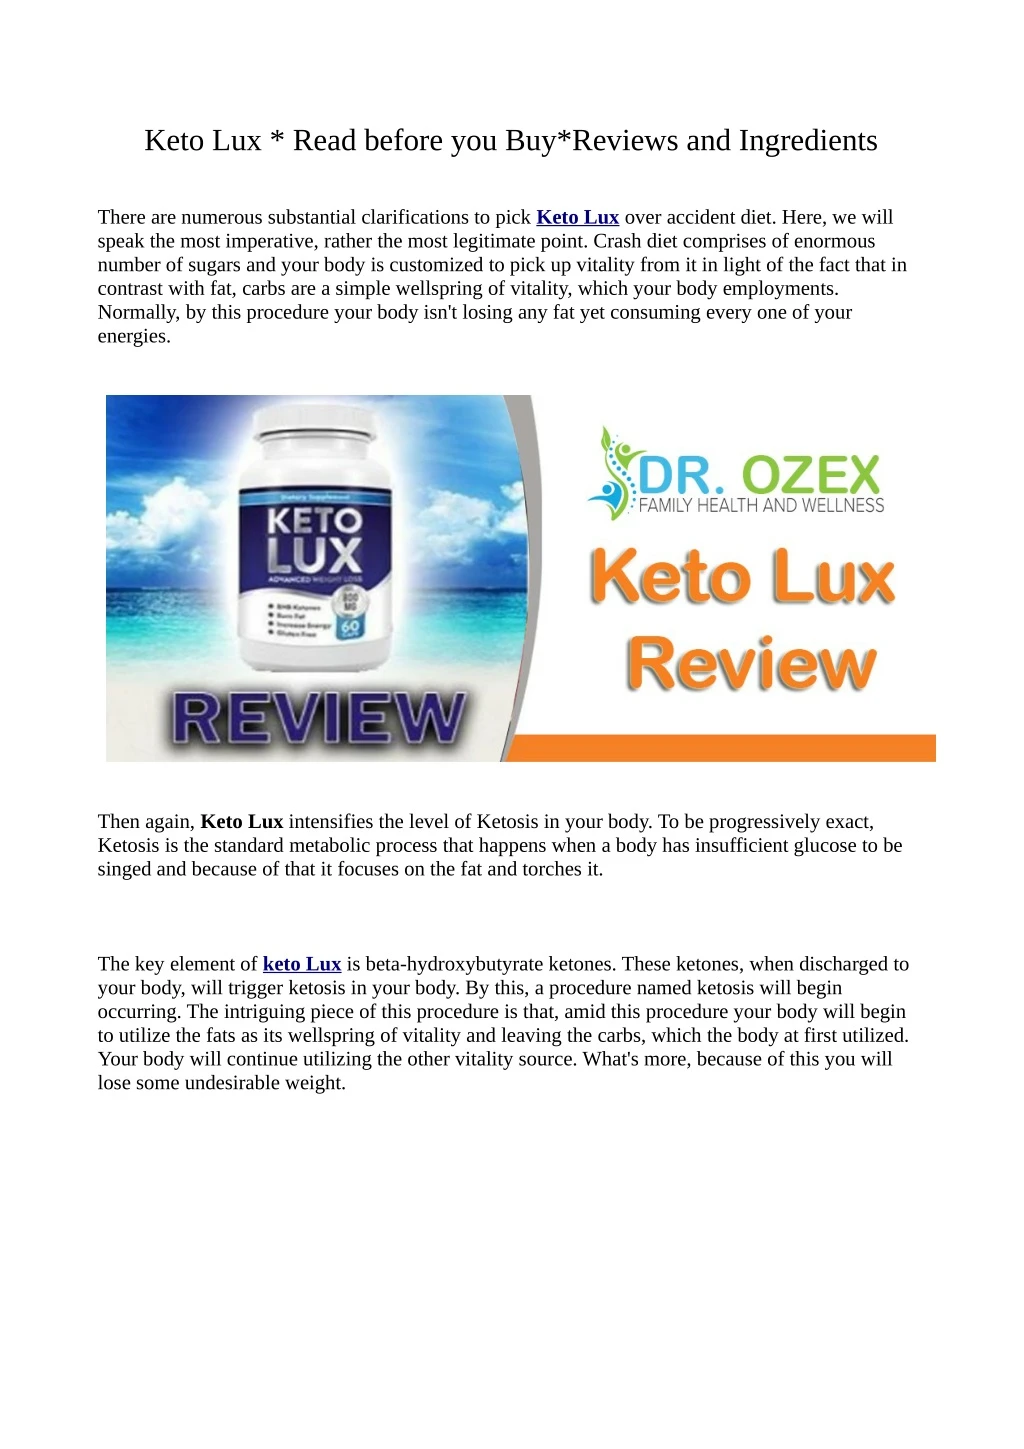 keto lux read before you buy reviews